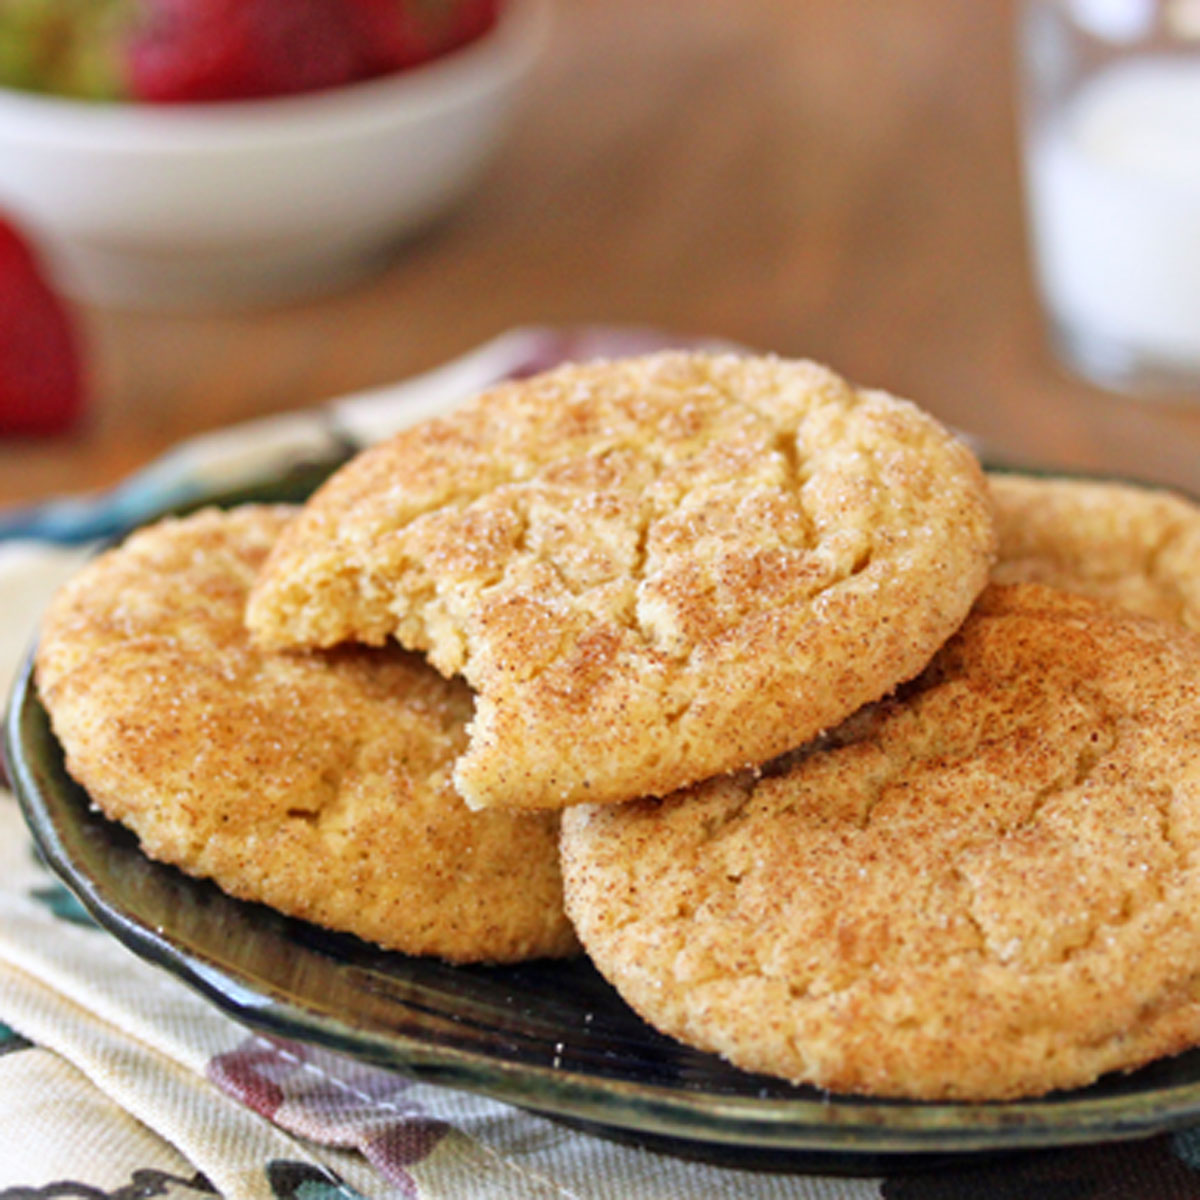 3 Snickerdoodle Cookies on a plate with a bite removed from the top cookie.